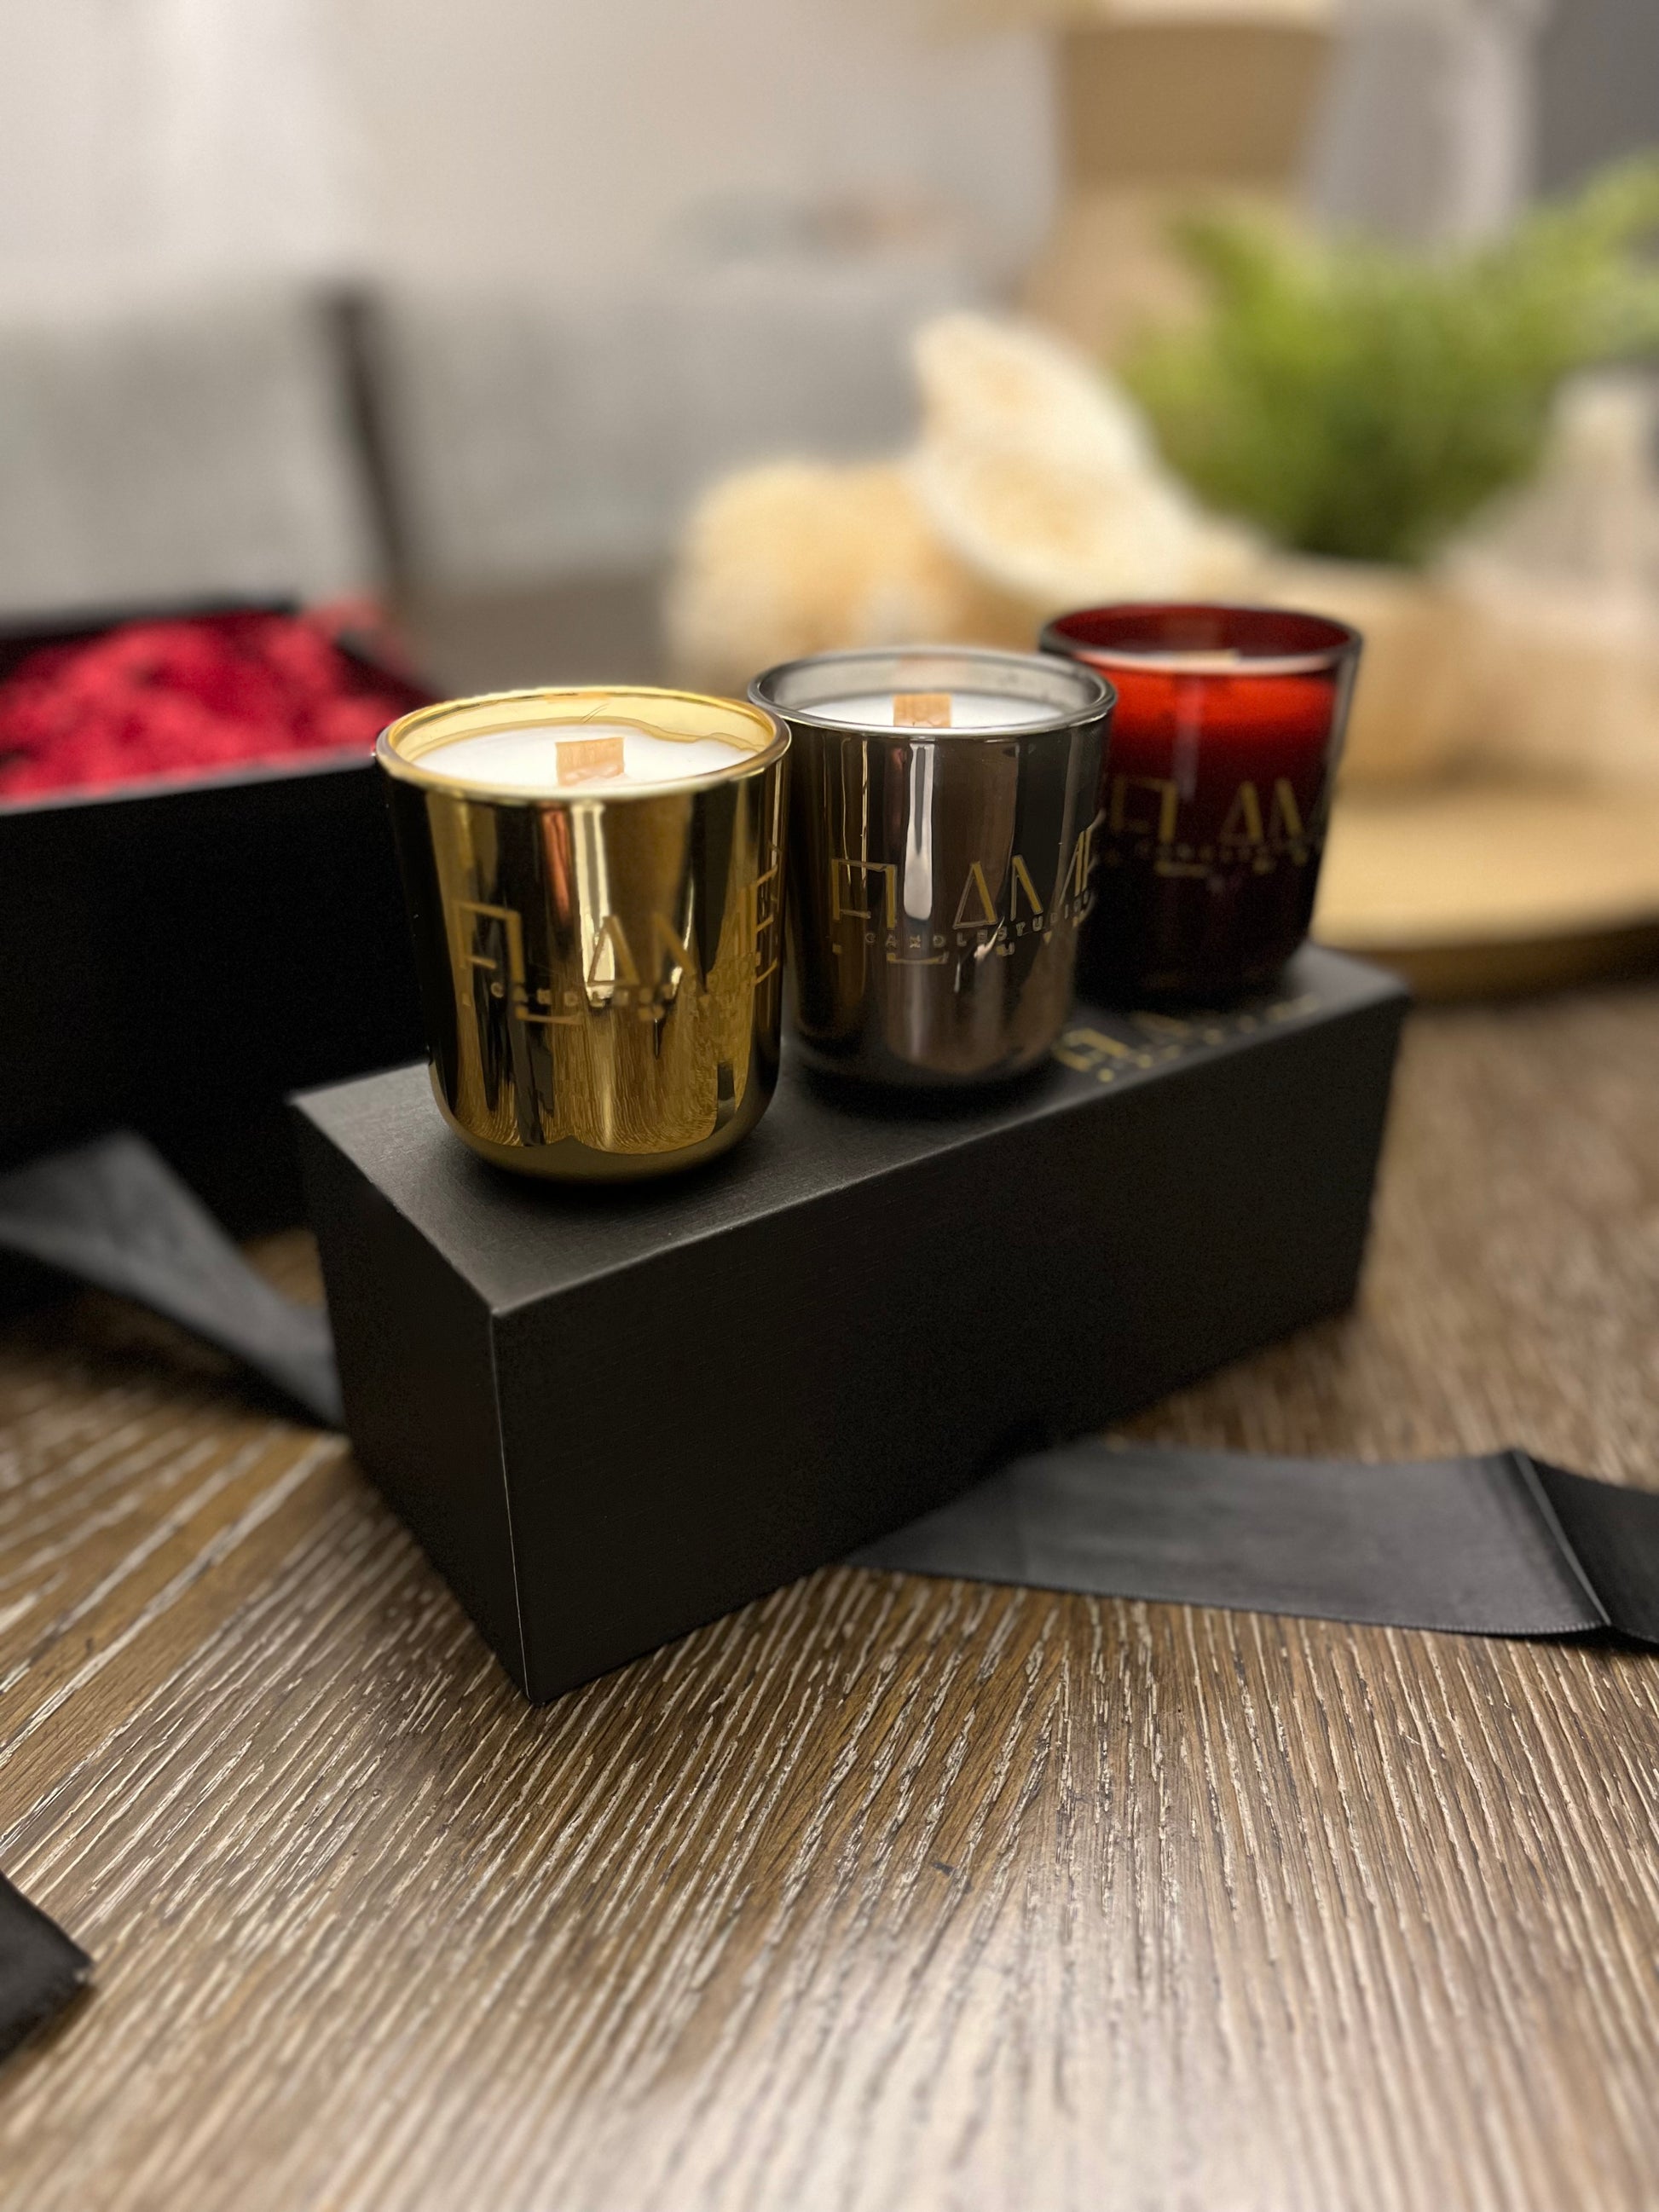 Buy Gold-toned Festive Gifts for Home & Kitchen by Stylemyway